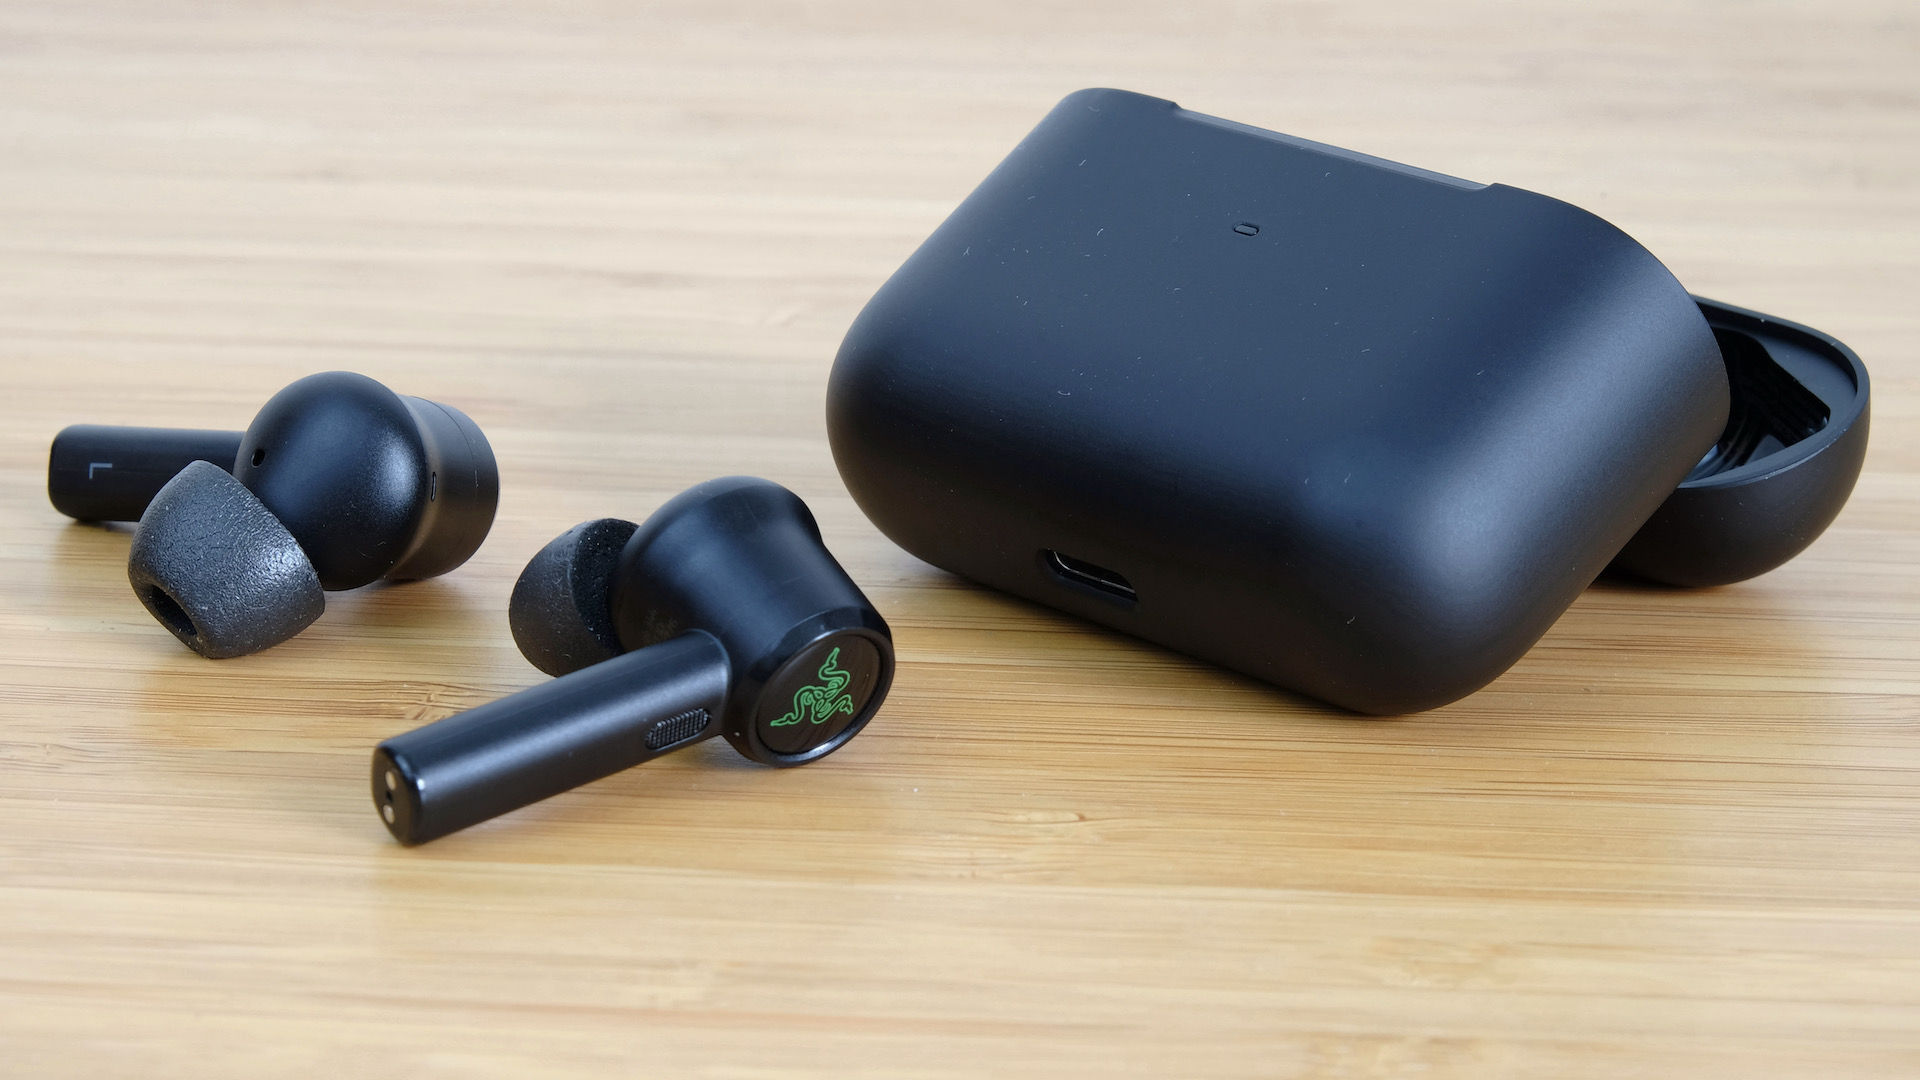 Razer Hammerhead (2021) review: These earbuds are lit